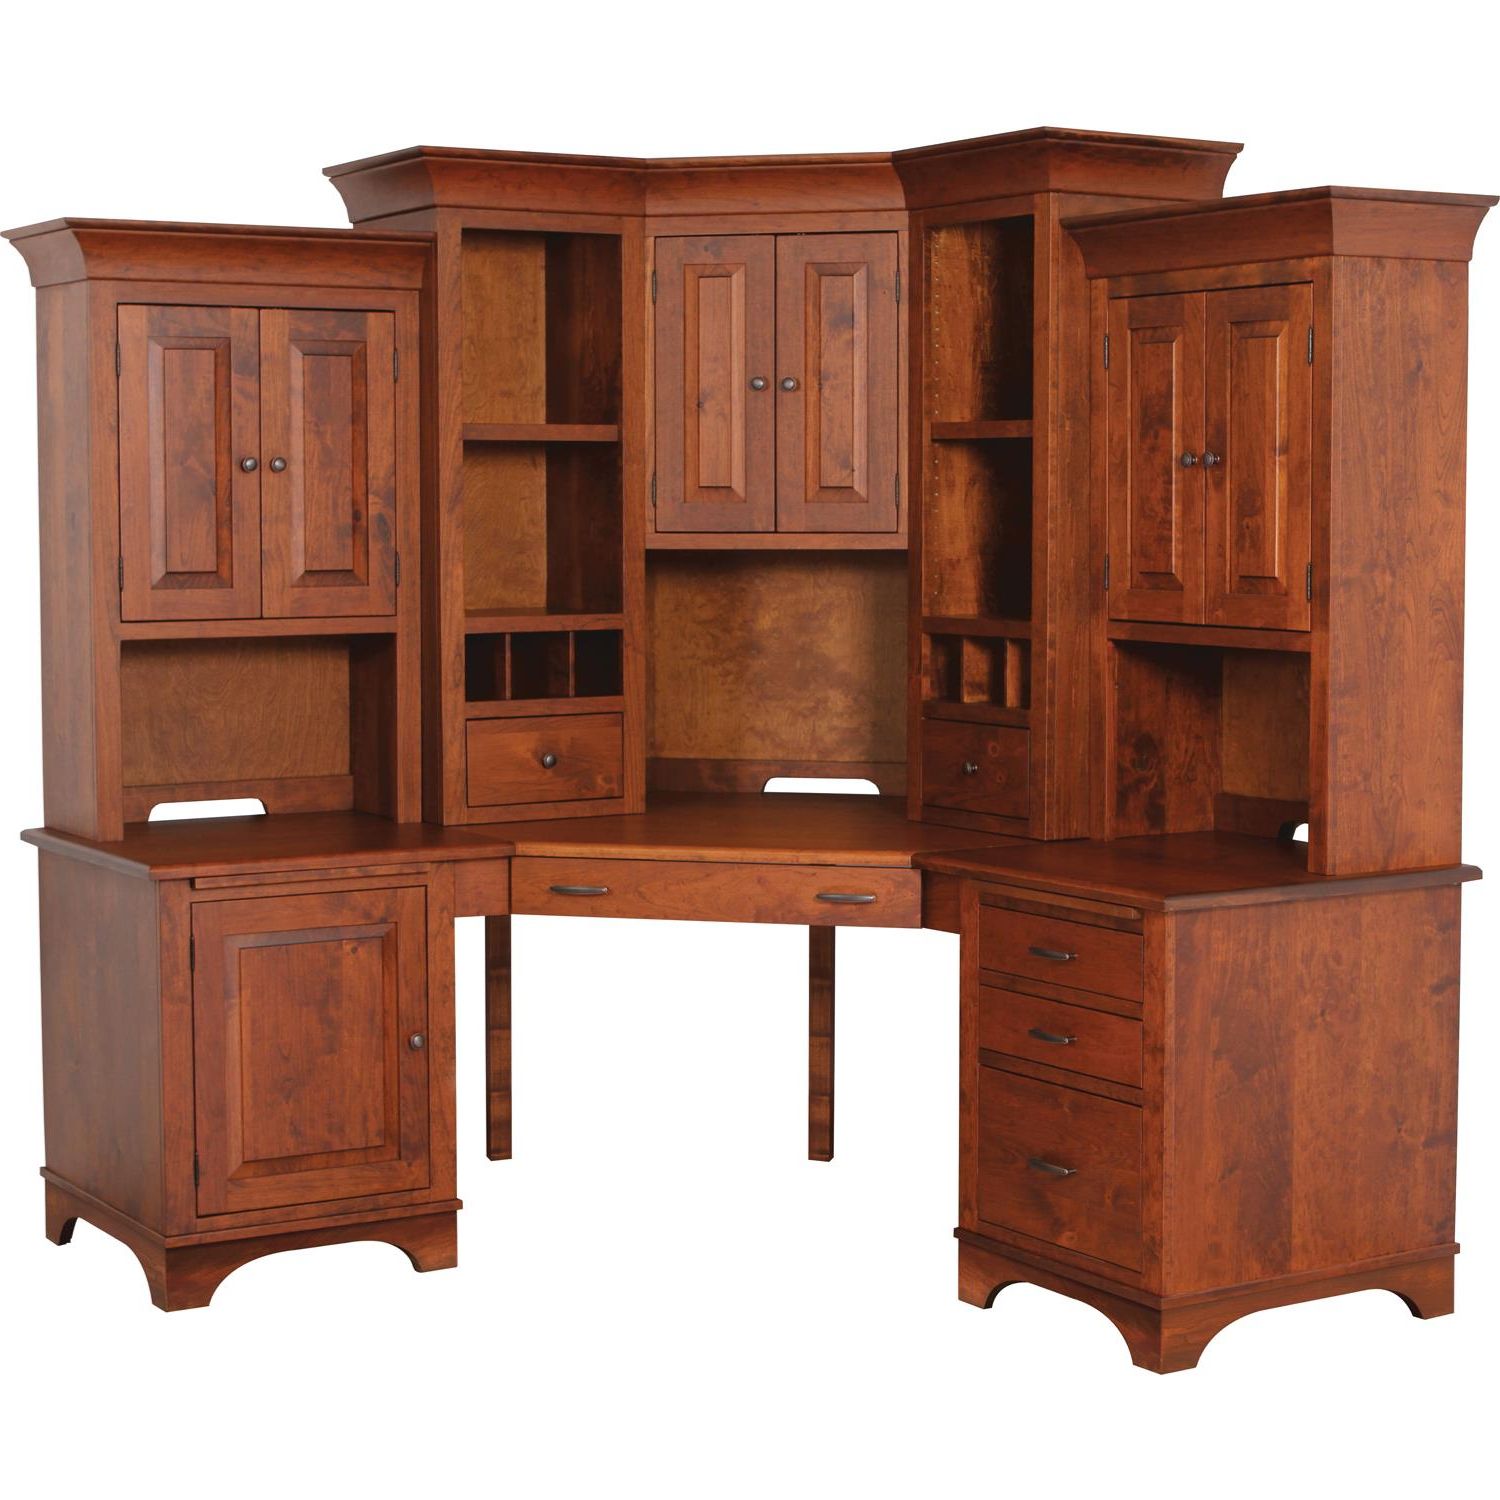 Rustic Brown Corner Desks Throughout Most Current Finley Corner Desk And Hutch – Oak Country Peddler (View 6 of 15)